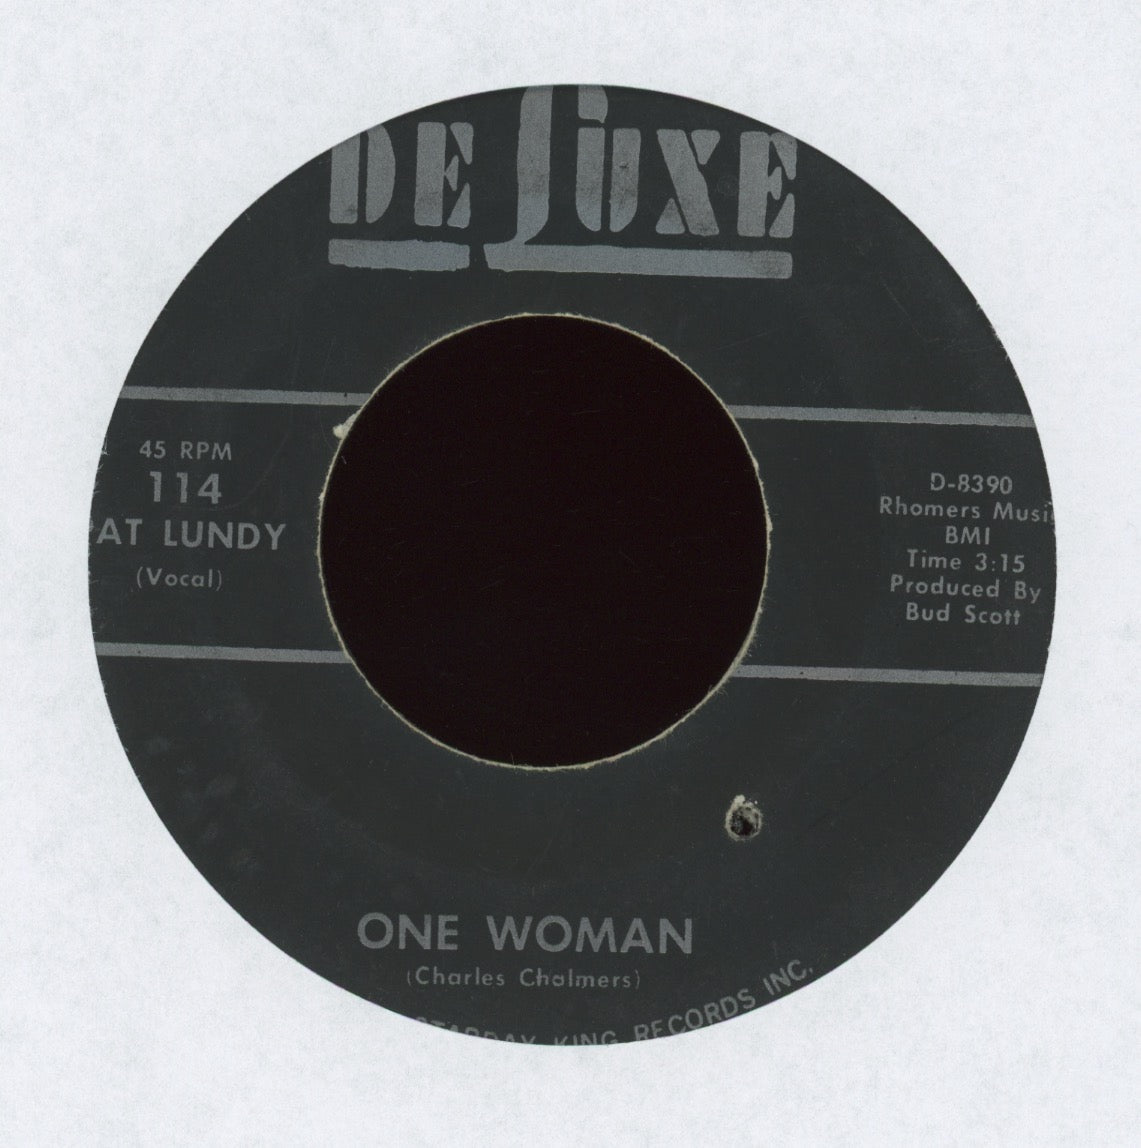 Pat Lundy - One Woman on DeLuxe